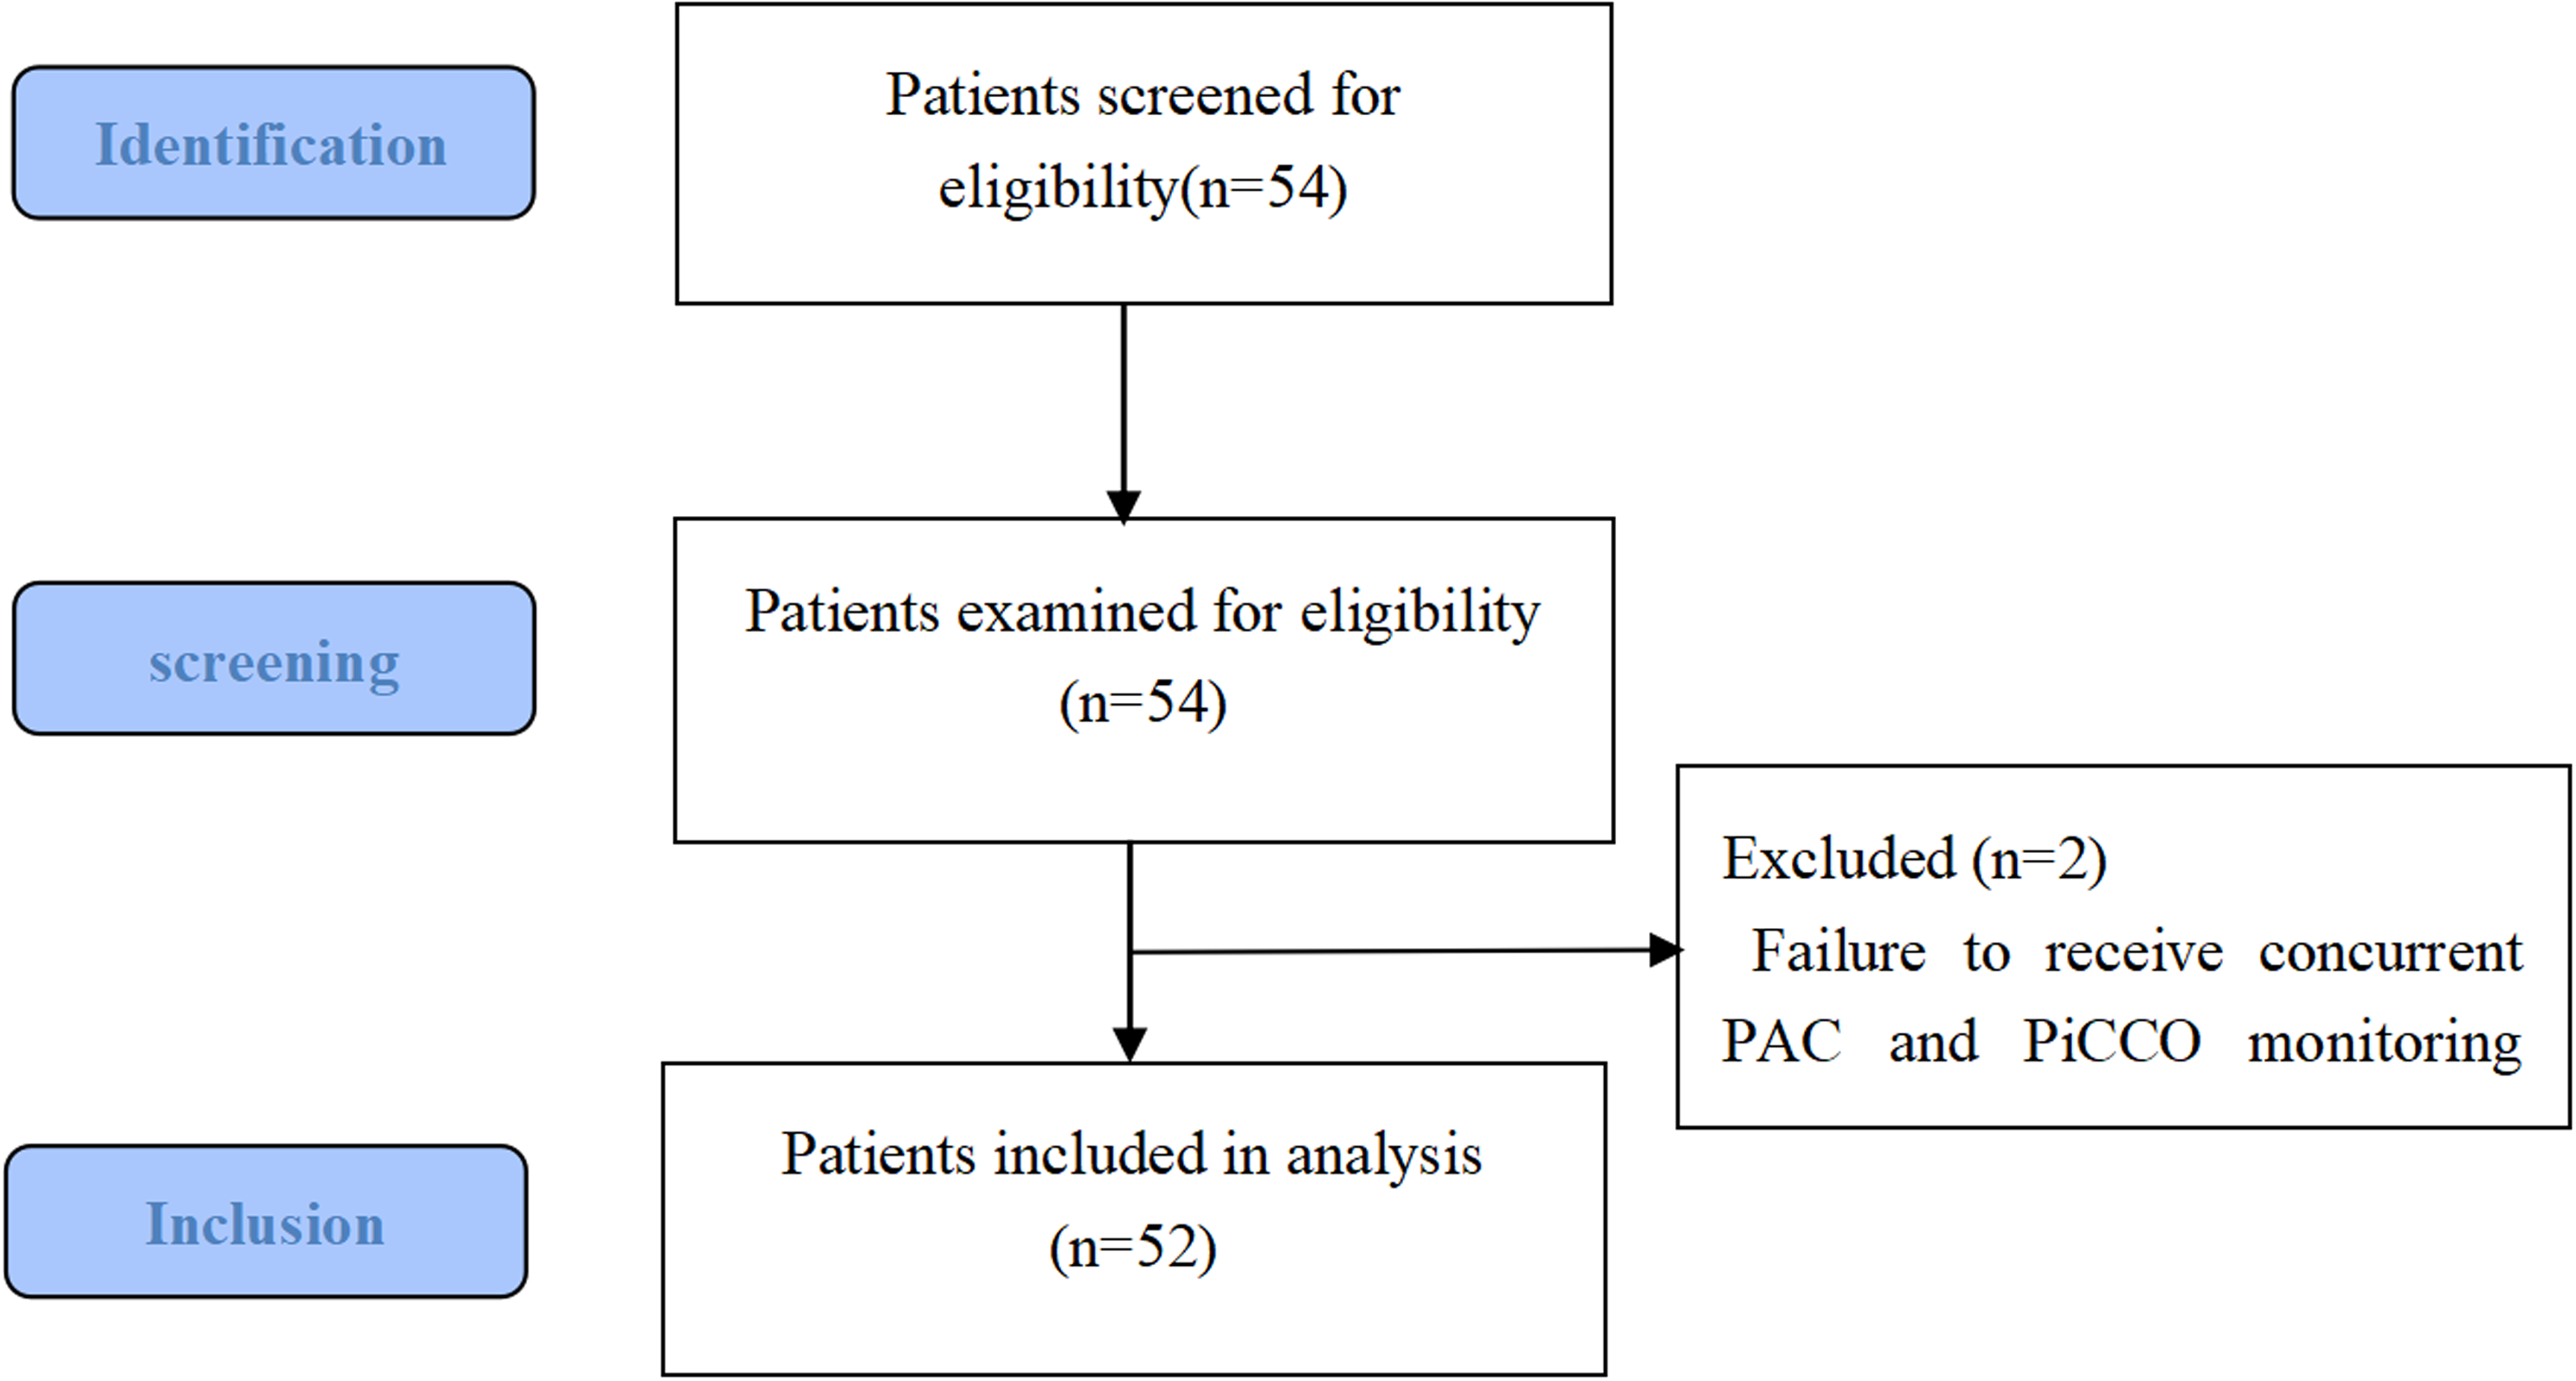 A comparison of hemodynamic measurement methods during orthotopic liver transplantation: evaluating agreement and trending ability of PiCCO versus pulmonary artery catheter techniques